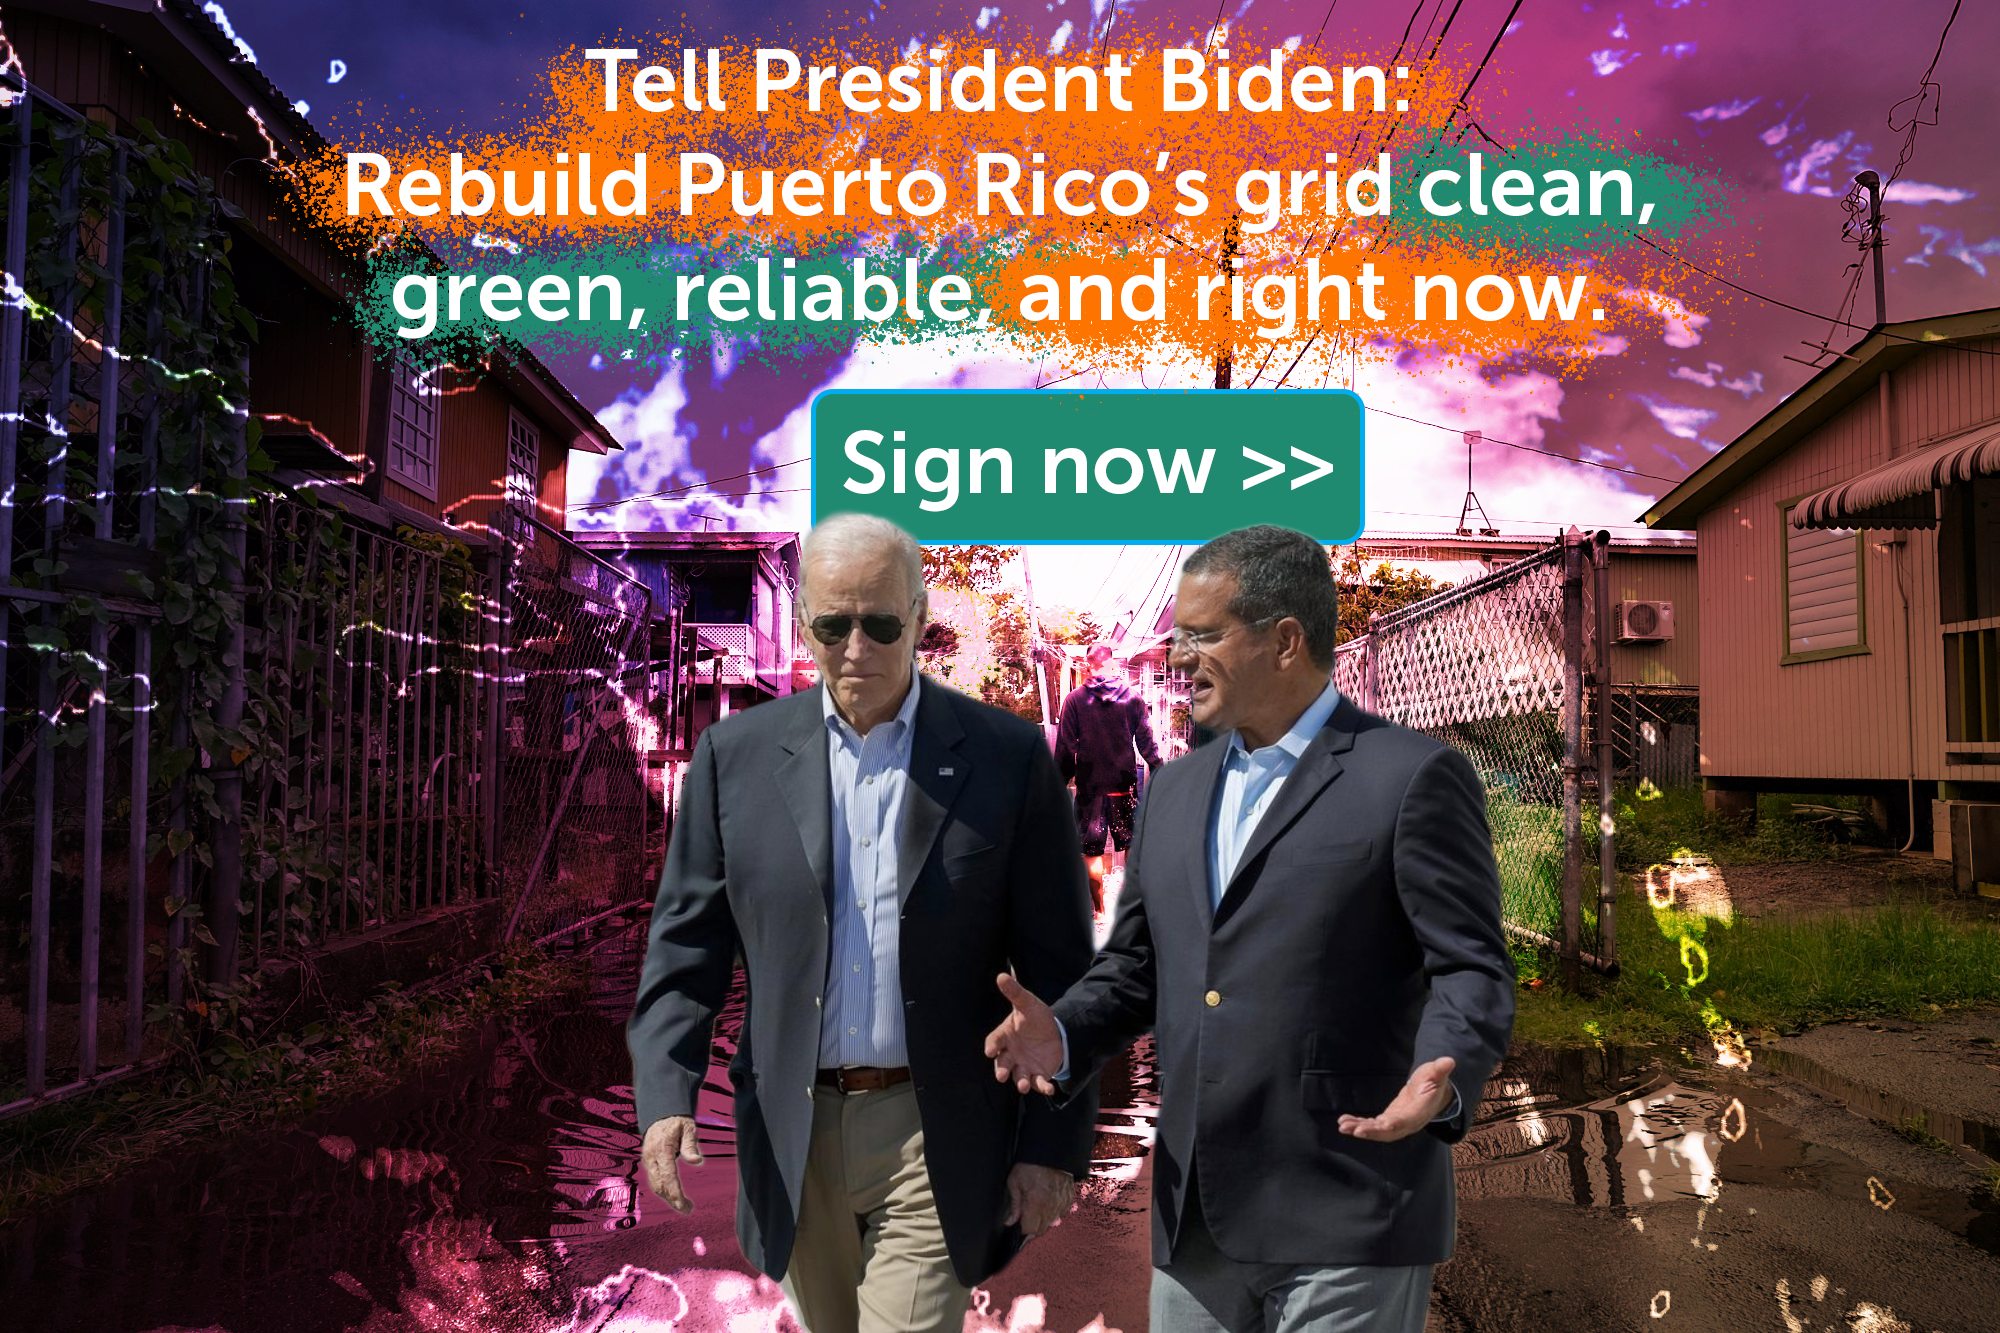 Tell President Biden: Rebuild Puerto Rico's electric grid clean, green, reliable, and right now